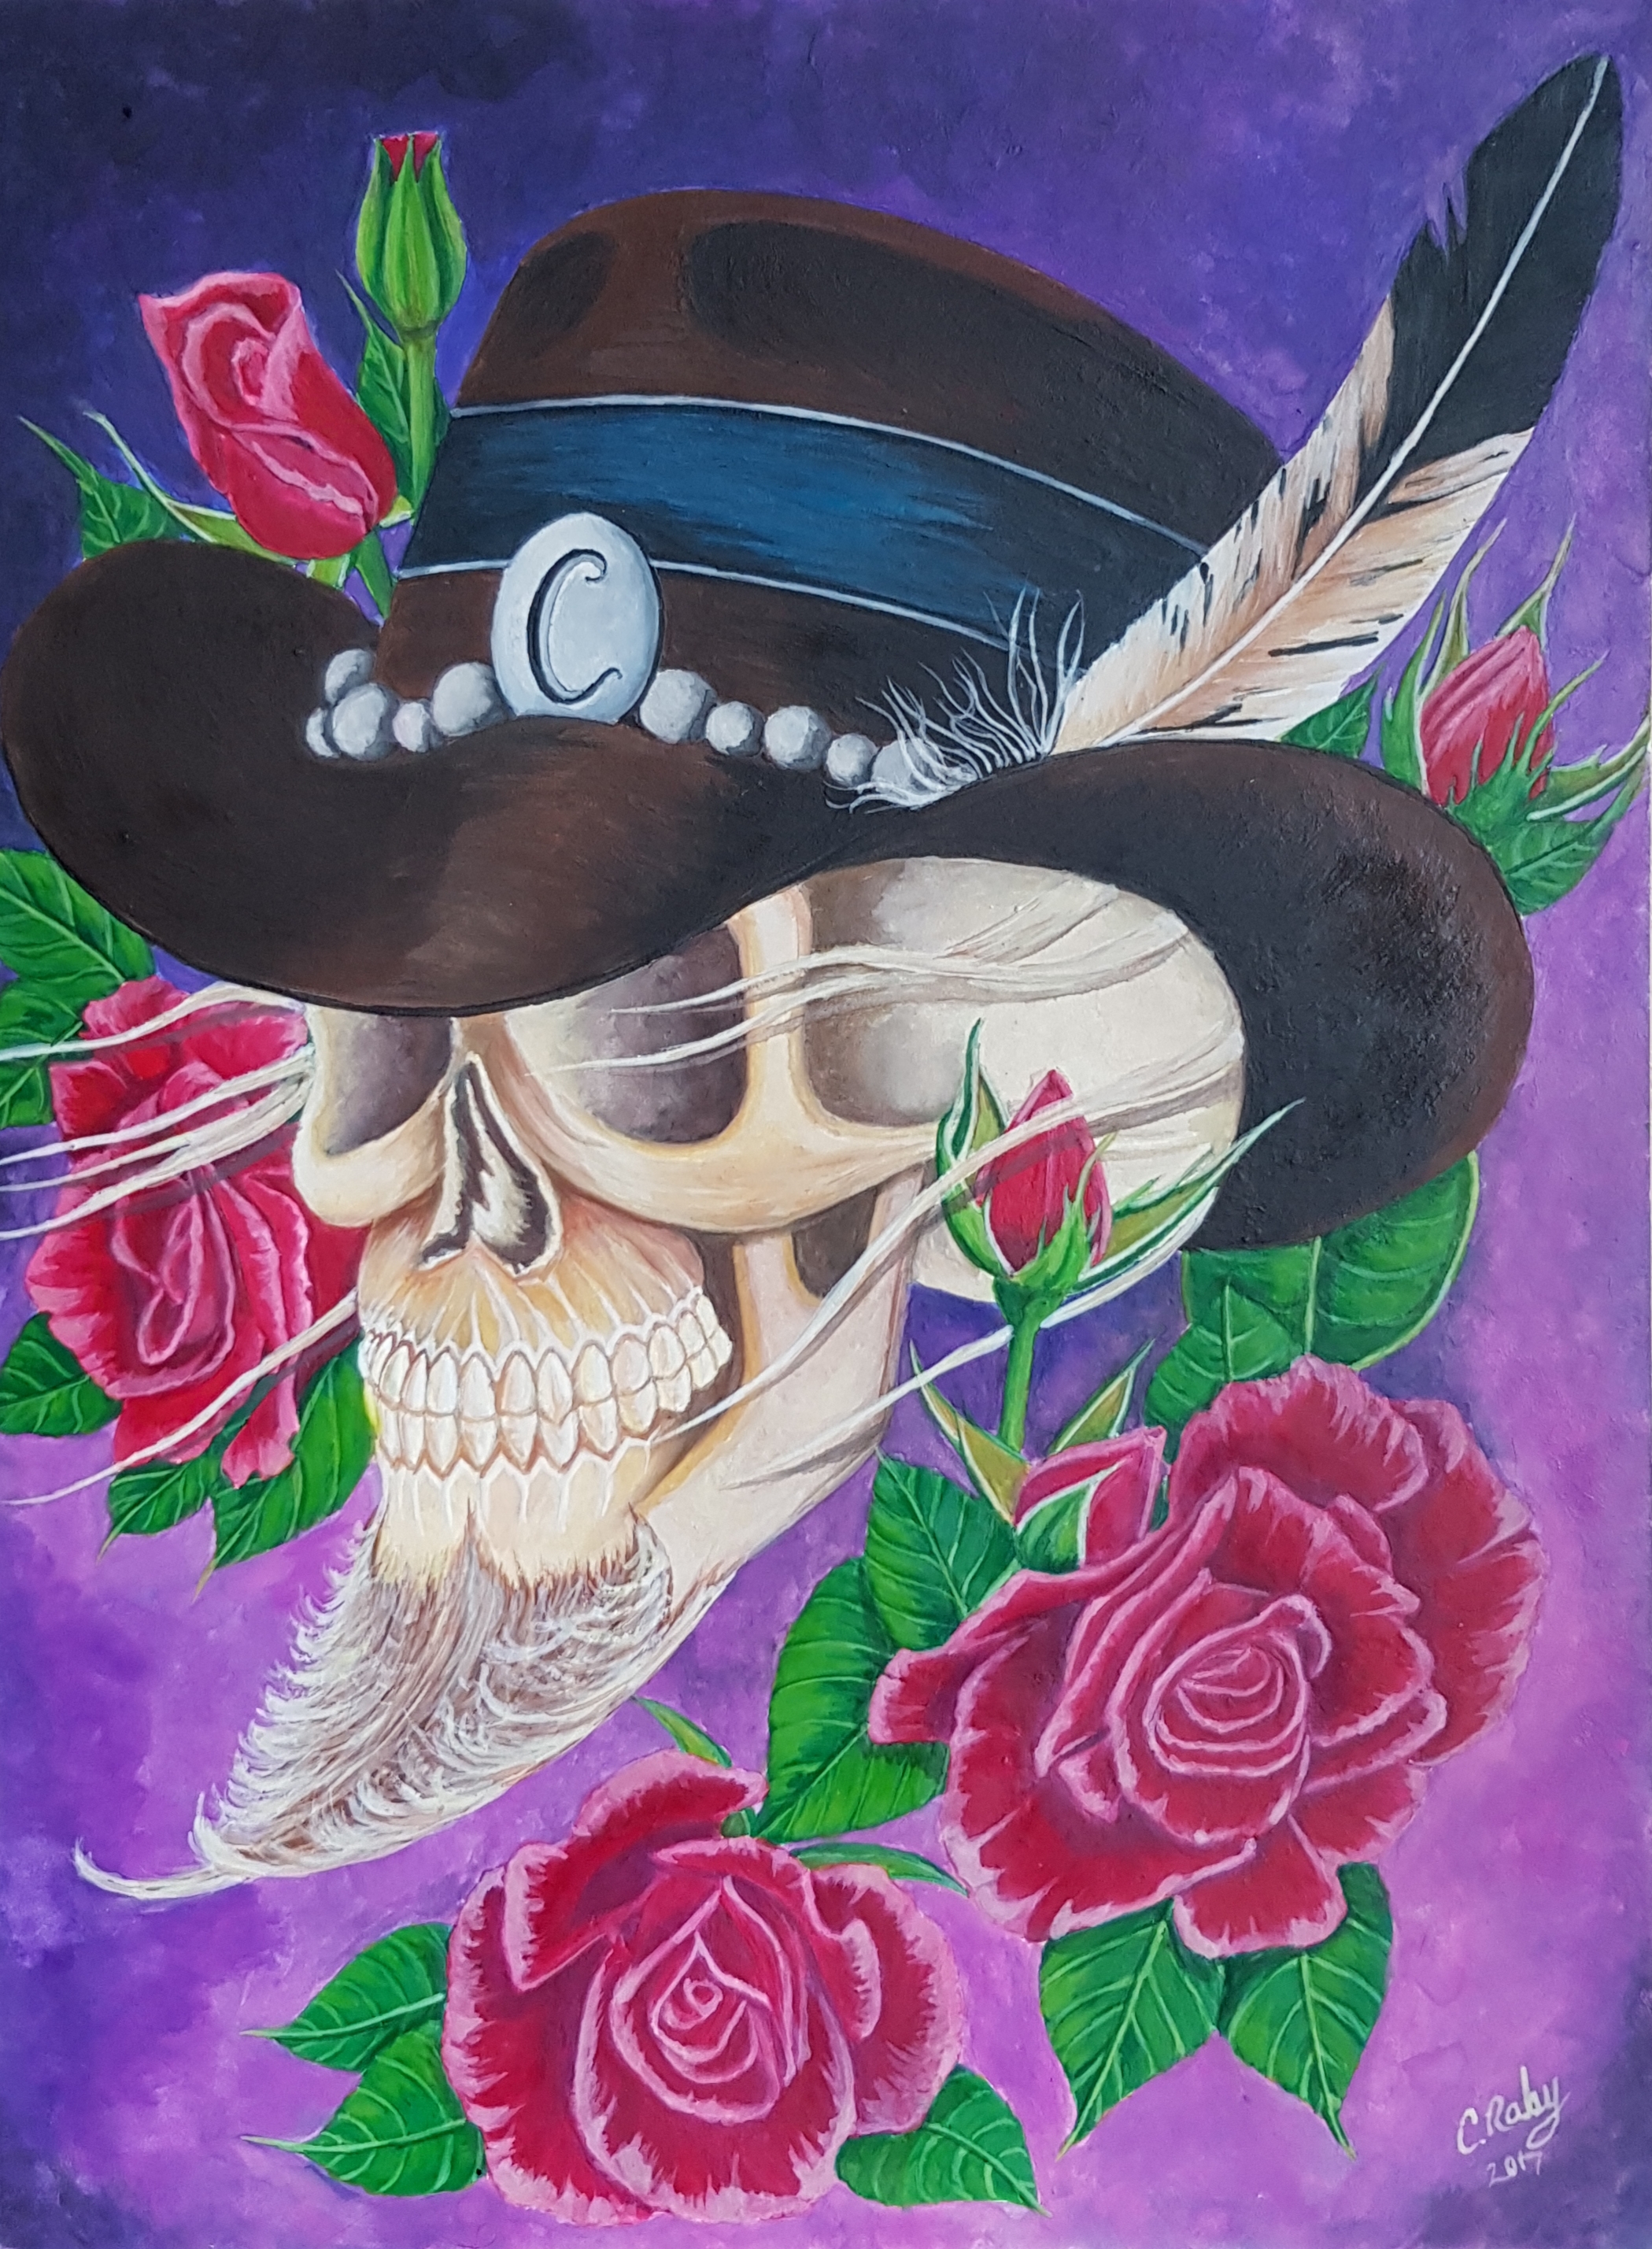 art-Charles-skull with C hat and roses